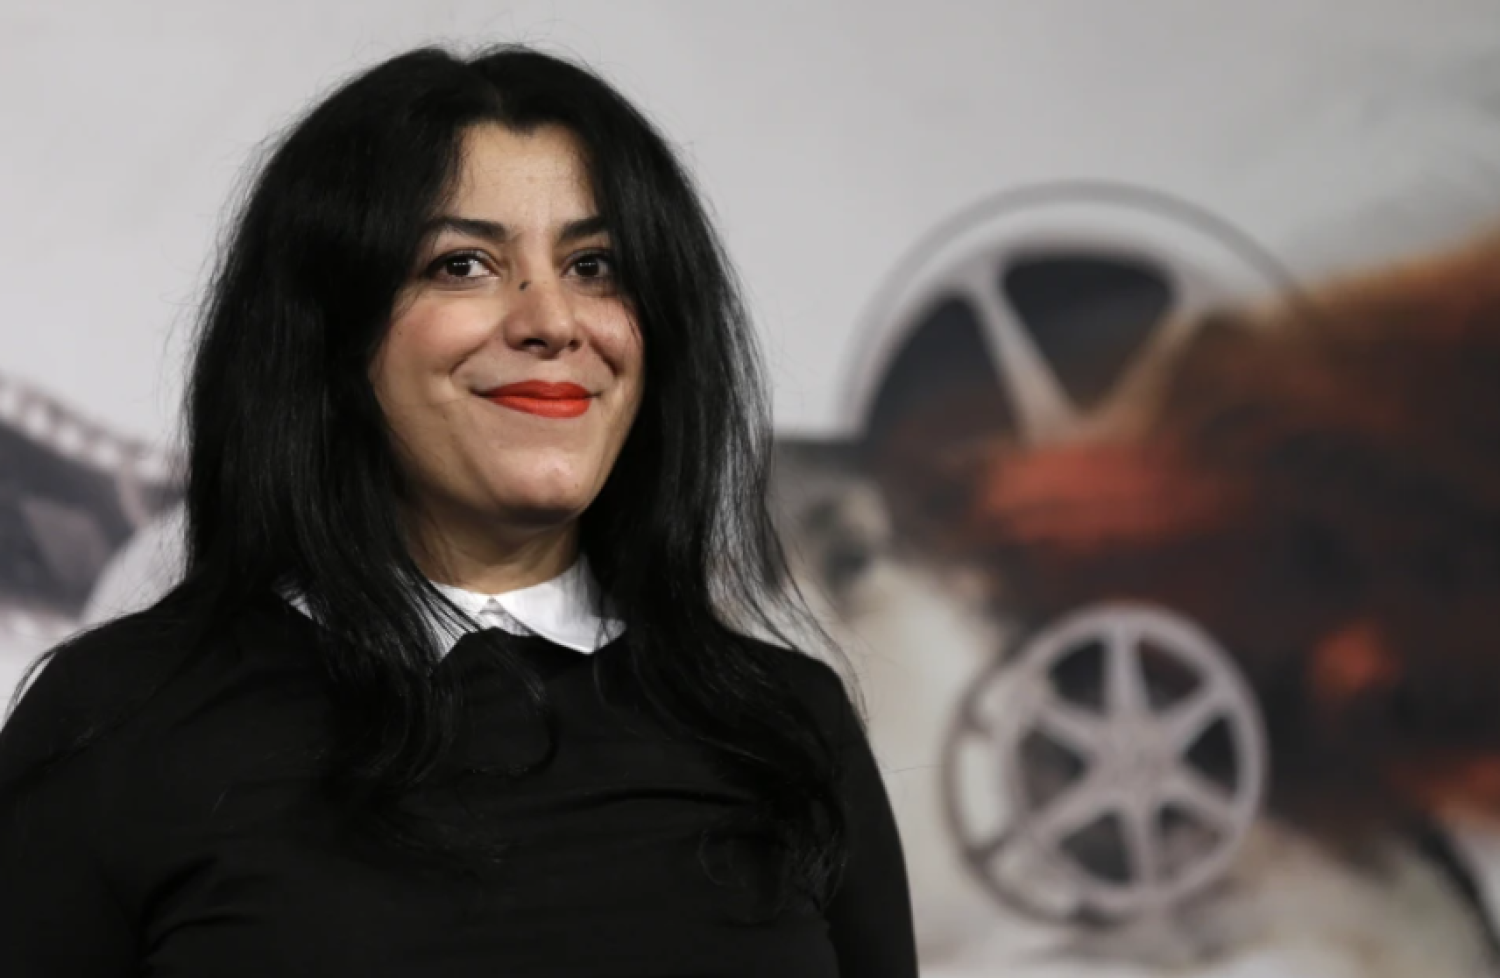 FILE - Director, illustrator and author Marjane Satrapi poses for photographers as she arrives to present the movie “La Bande des Jotas” at the 7th edition of the Rome International Film Festival in Rome, on Nov. 16, 2012. Marjane Satrapi, the acclaimed Iranian-French filmmaker and artist, has won the 2024 Princess of Asturias Foundation award for communication and humanities, the foundation announced Tuesday April 30, 2024. (AP Photo/Alessandra Tarantino, File)

